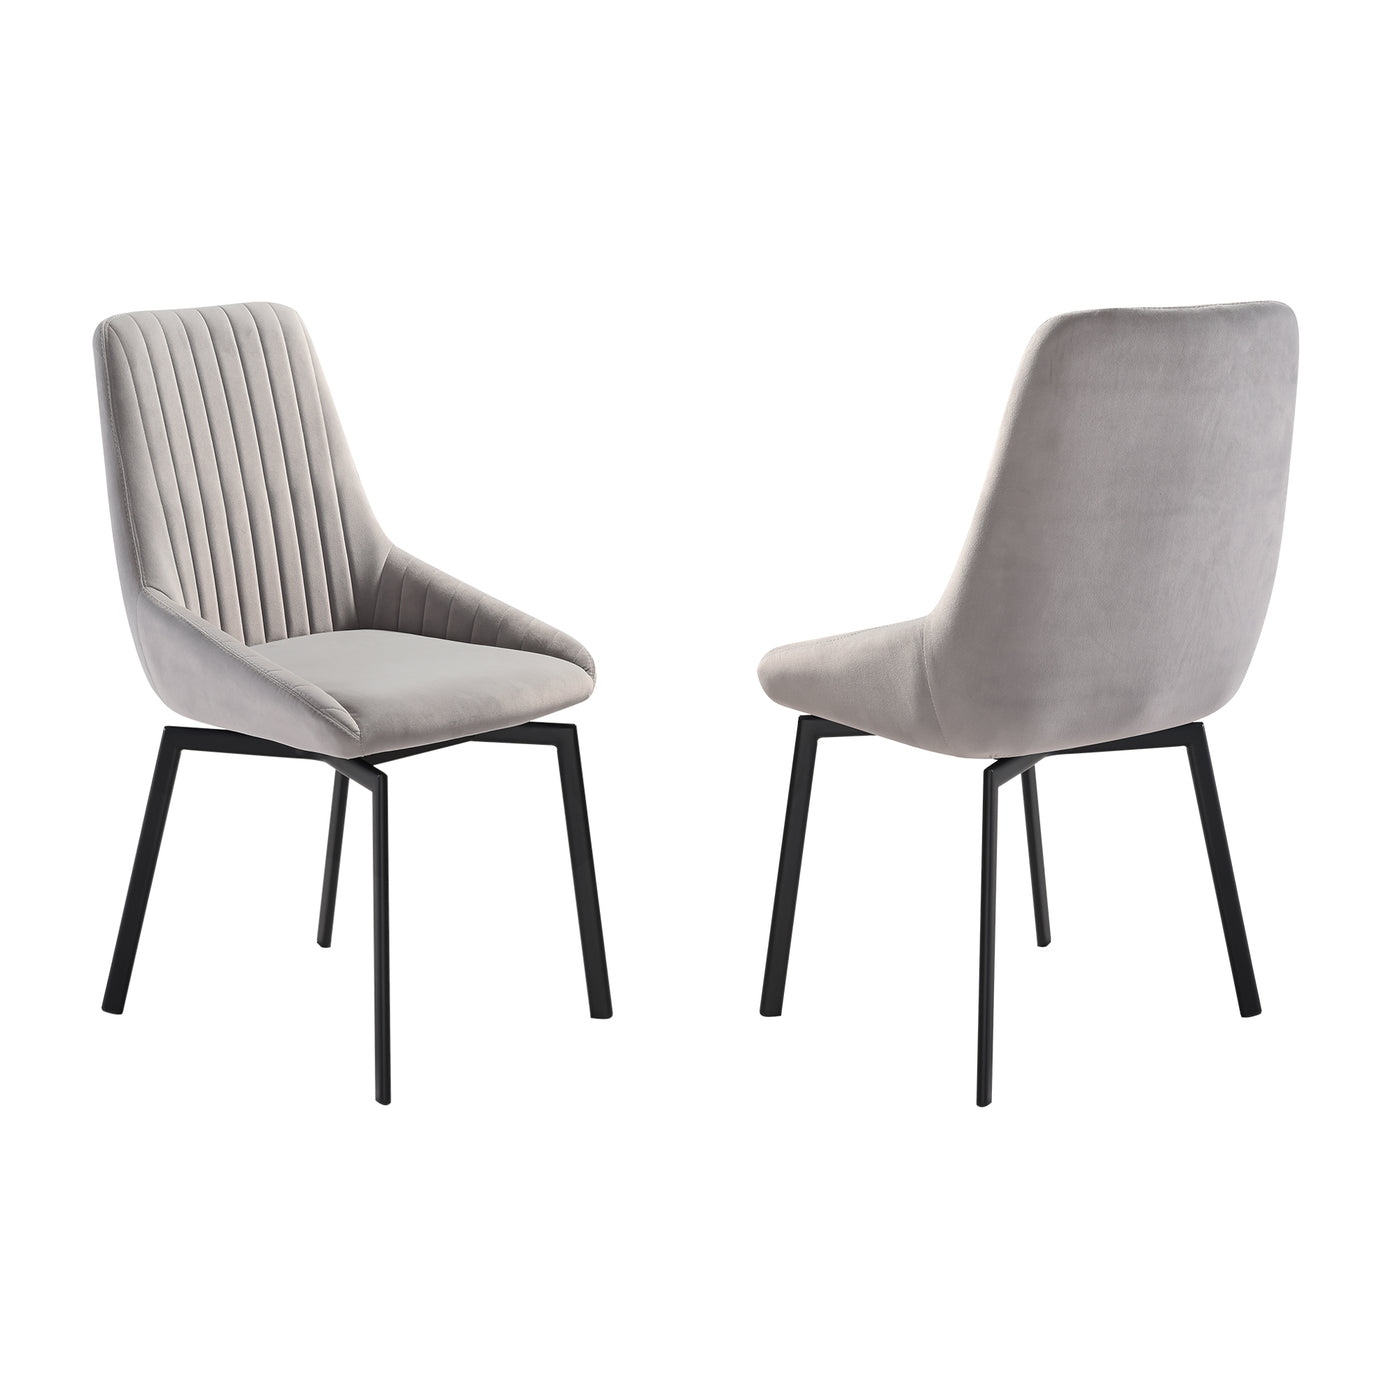 Susie Swivel Upholstered Dining Chair Set of 2